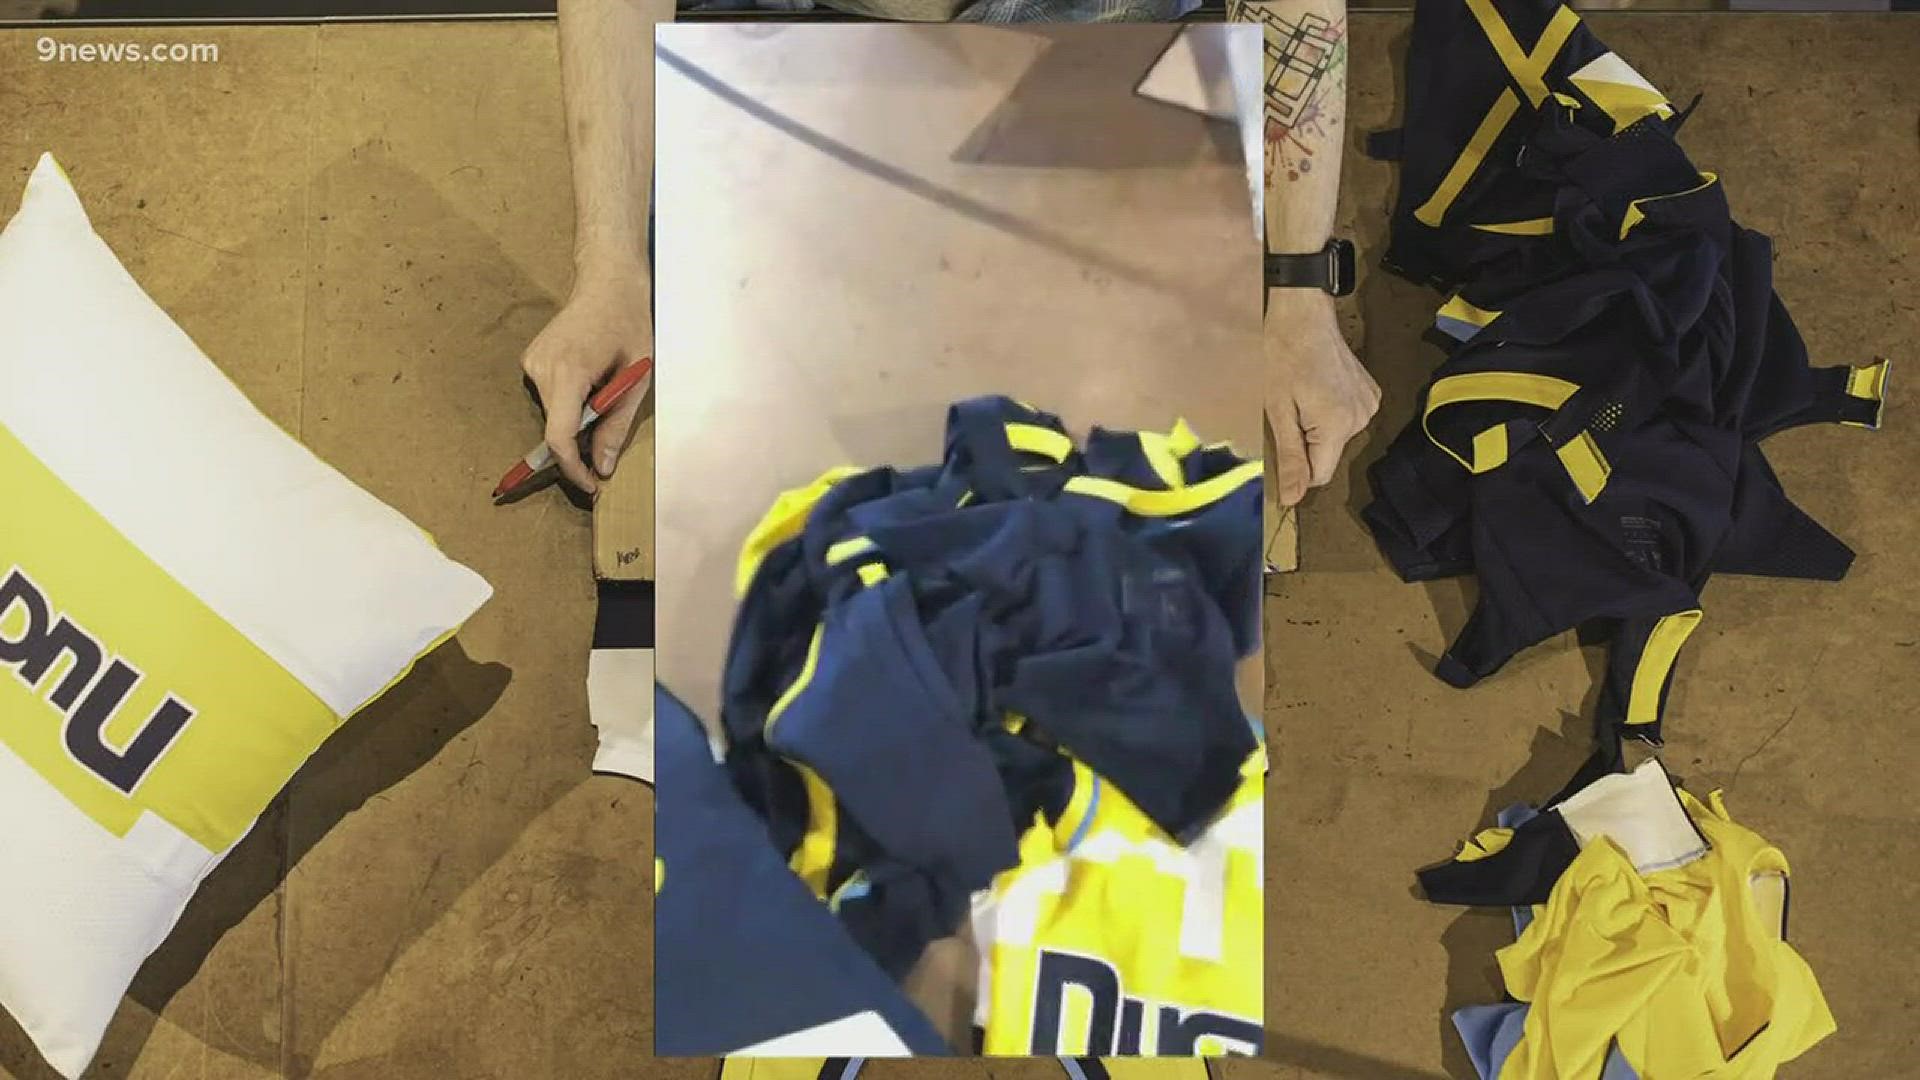 In Portland, hundreds of Nuggets jerseys are being ripped apart. But it's not all the bitter competition between these the Nuggets and Trail Blazers. It's something called "upcycling".